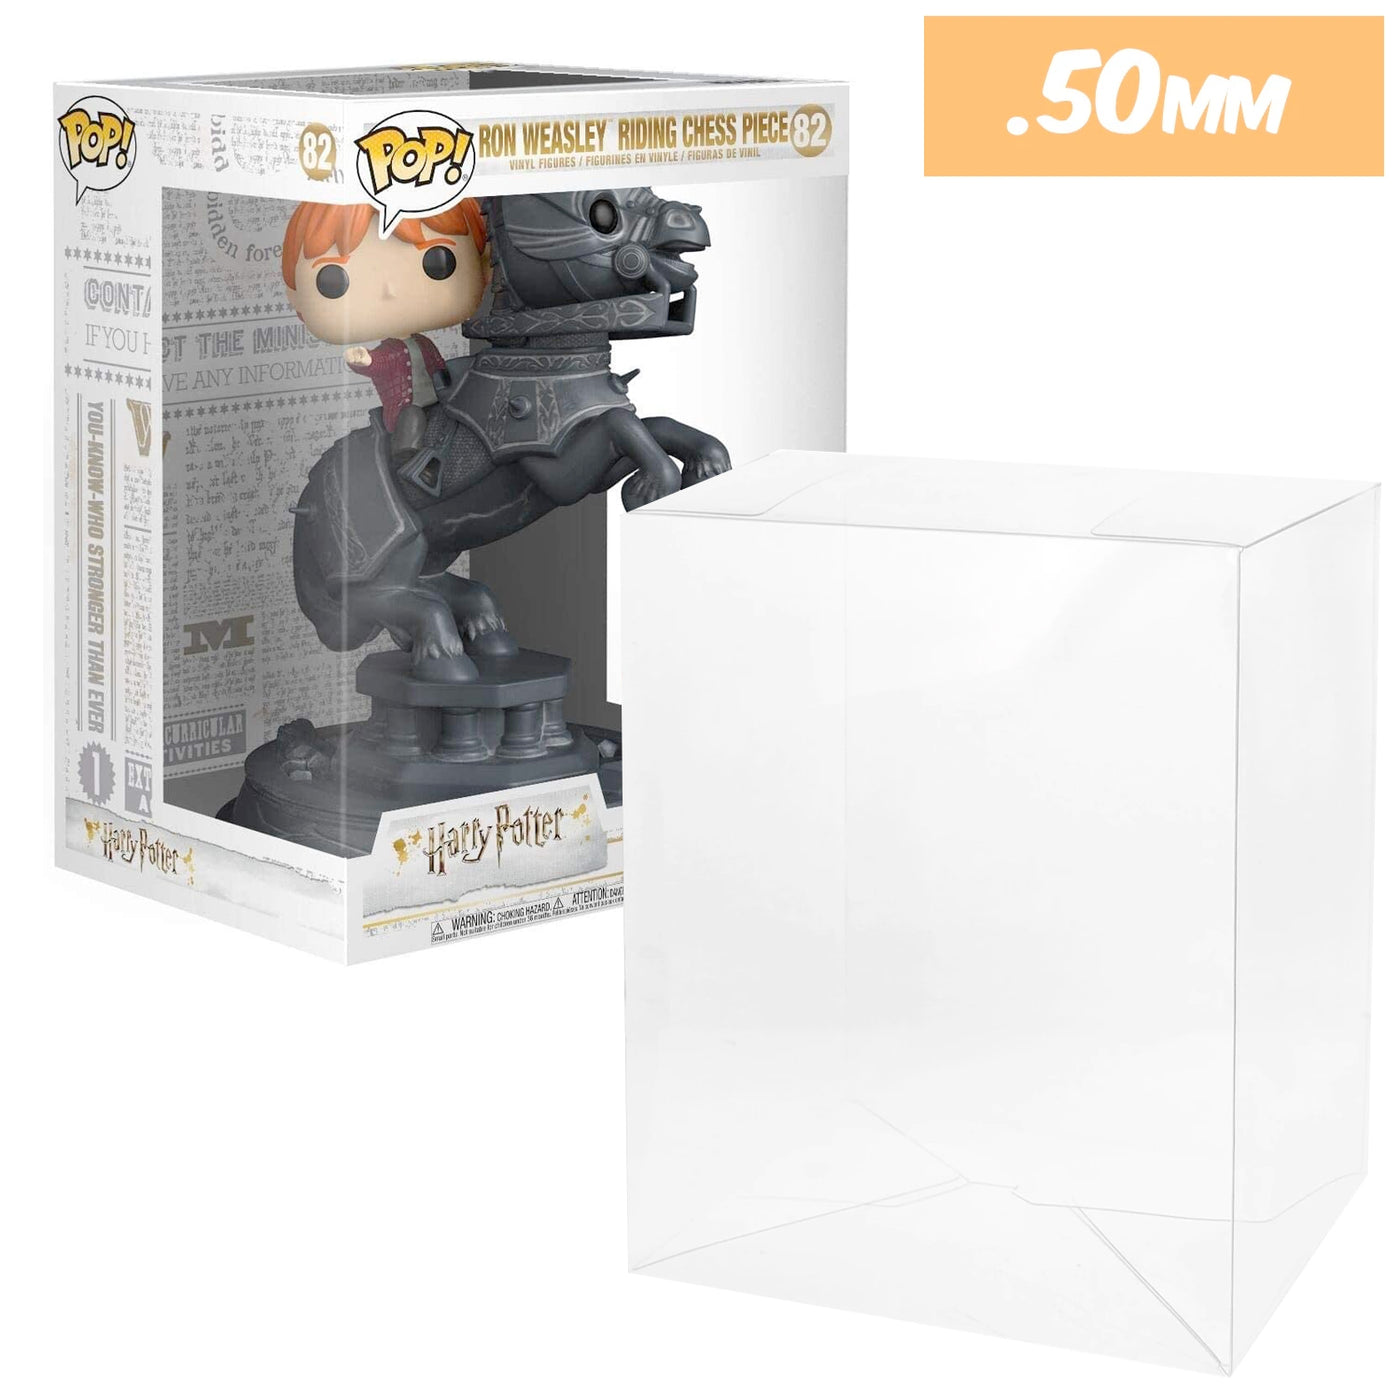 RON RIDING CHESS PIECE Pop Protectors for Funko (50mm thick) 10.25h x 7.5w x 6.75d